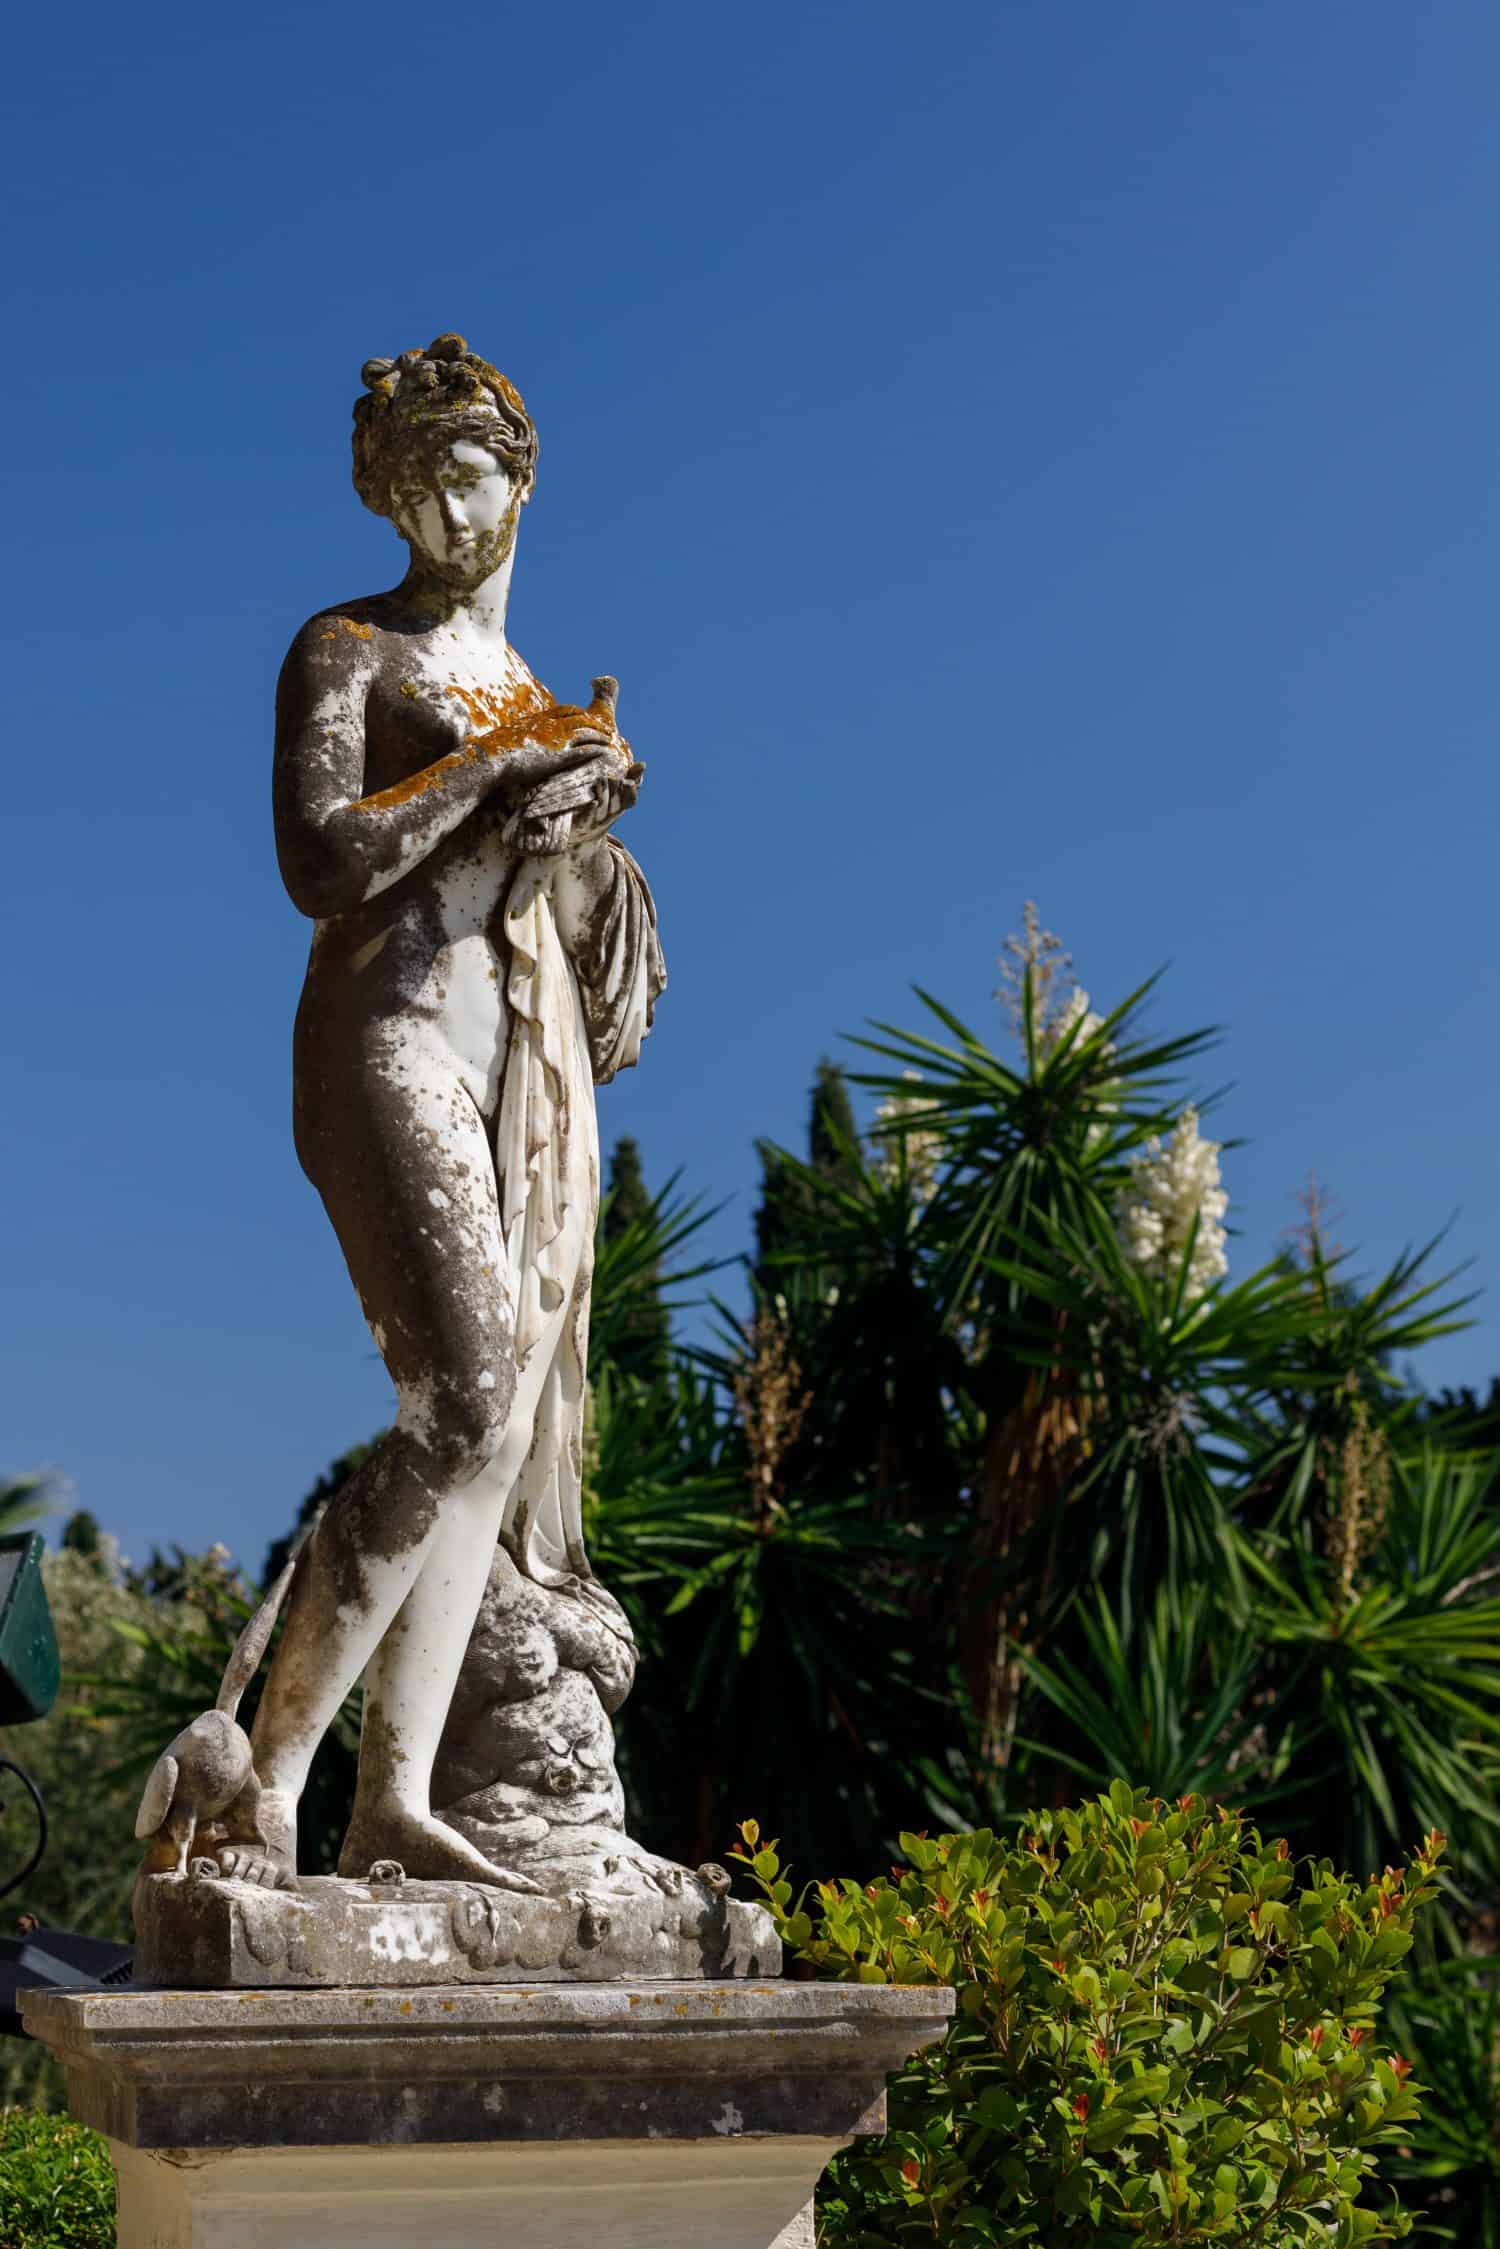 The Palace of the Empress Elisabeth Sissi of Austria, known as the Achilleion Palace, is home to a striking statue of Aphrodite holding a dove. Corfu, Greece